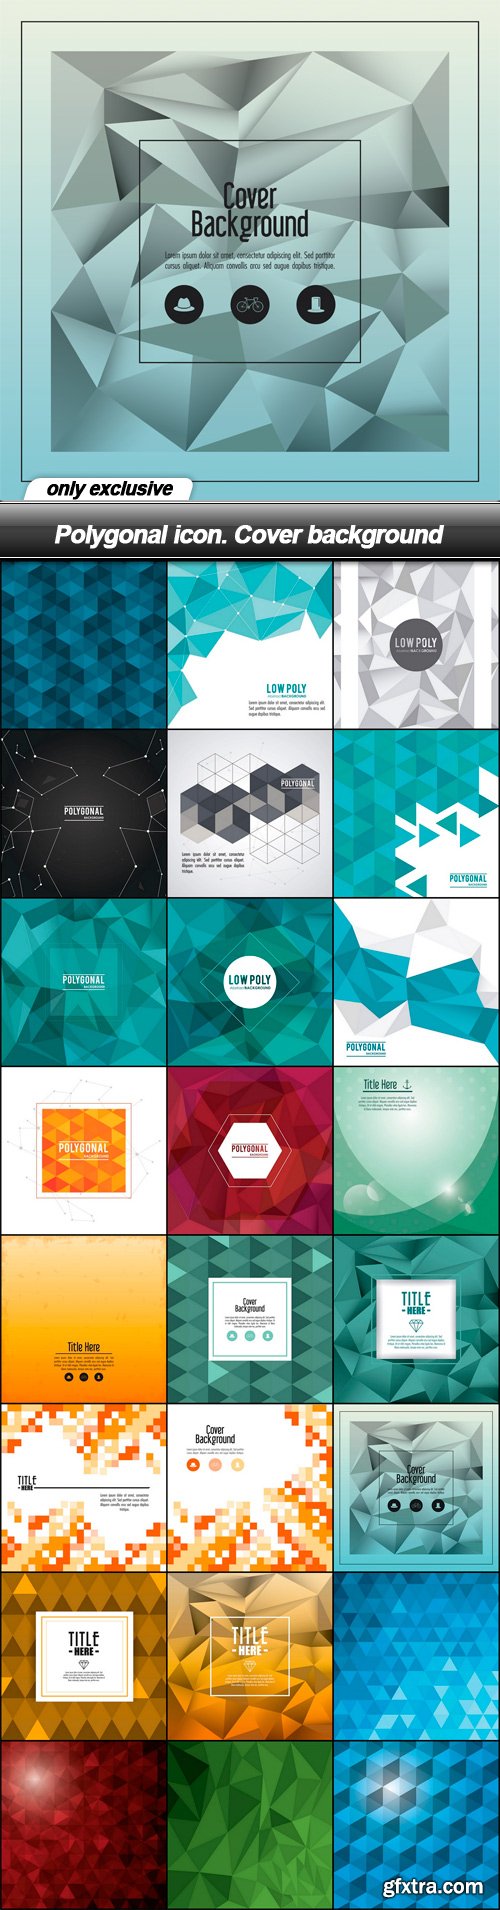 Polygonal icon. Cover background - 24 EPS